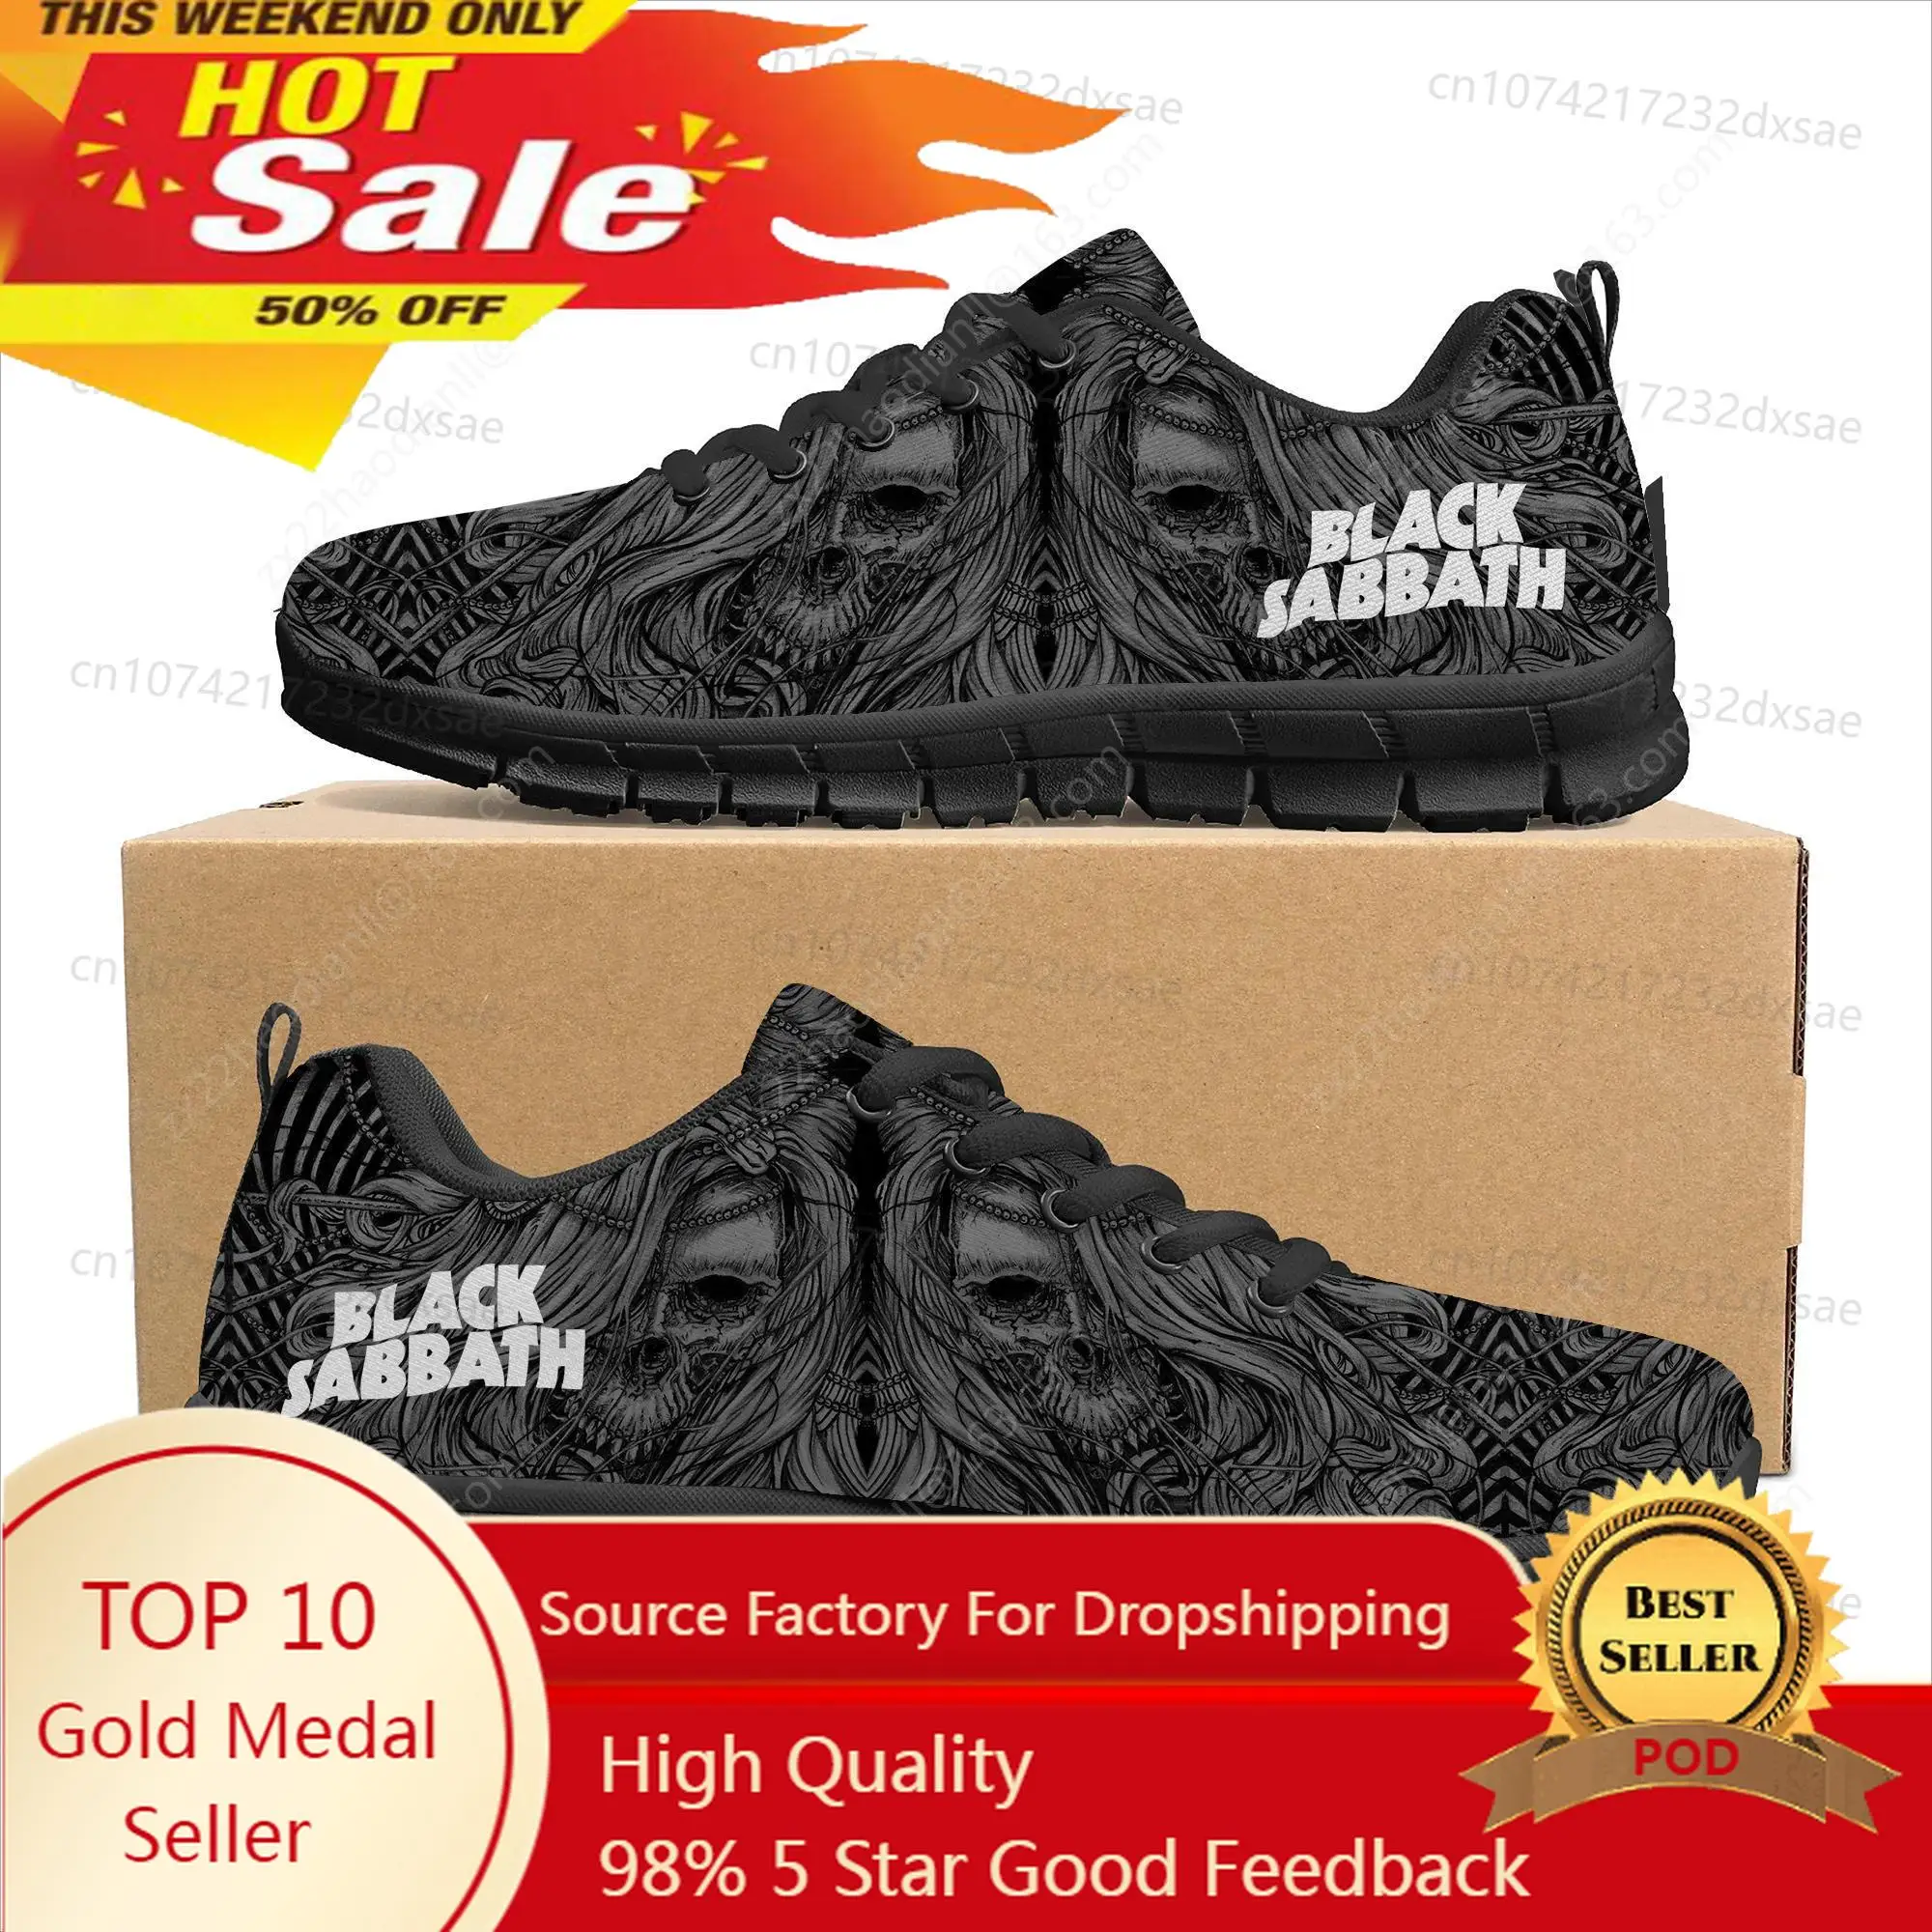 

Black Heavy Metal Band Sabbath Sports Shoes Mens Womens Teenager Kids Children Sneakers Casual Custom High Quality Couple Shoes